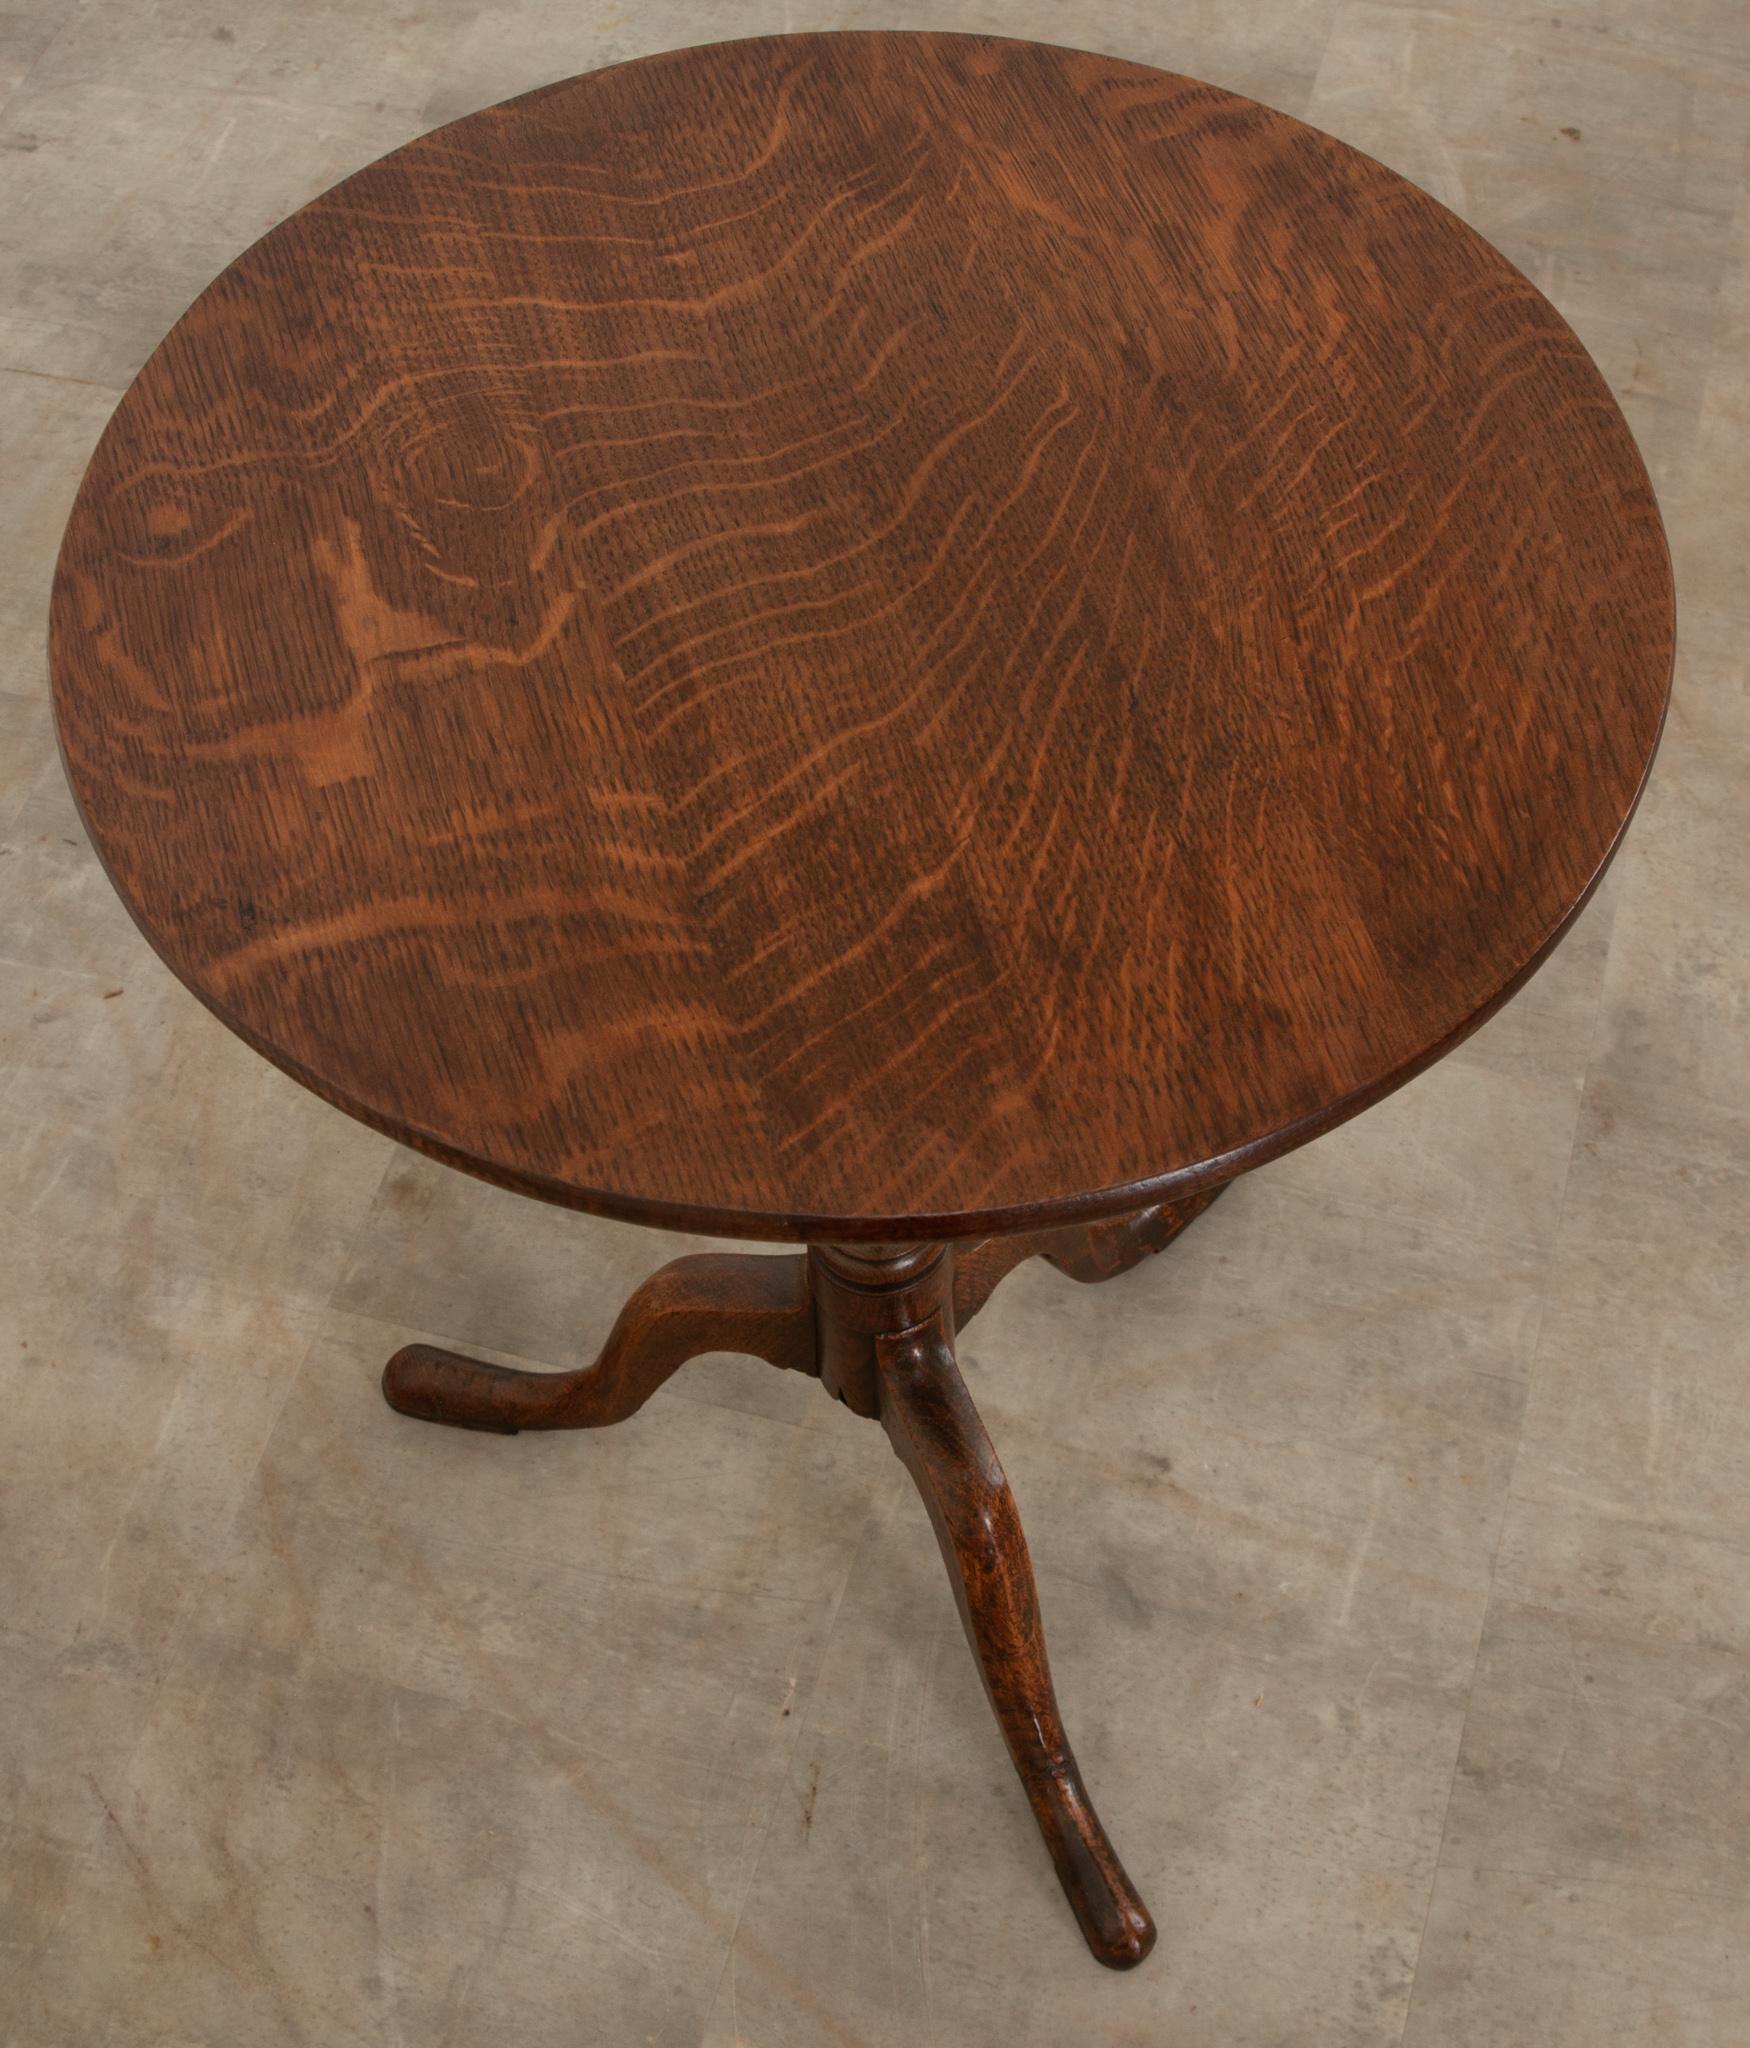 This English tilt top table was crafted from solid oak circa 1820. Simply constructed with a fantastic patina, the top tilts up to be 37-?”H x 20”W x 18”D when you need more space. The turned middle support connects to tripodal feet, giving it a